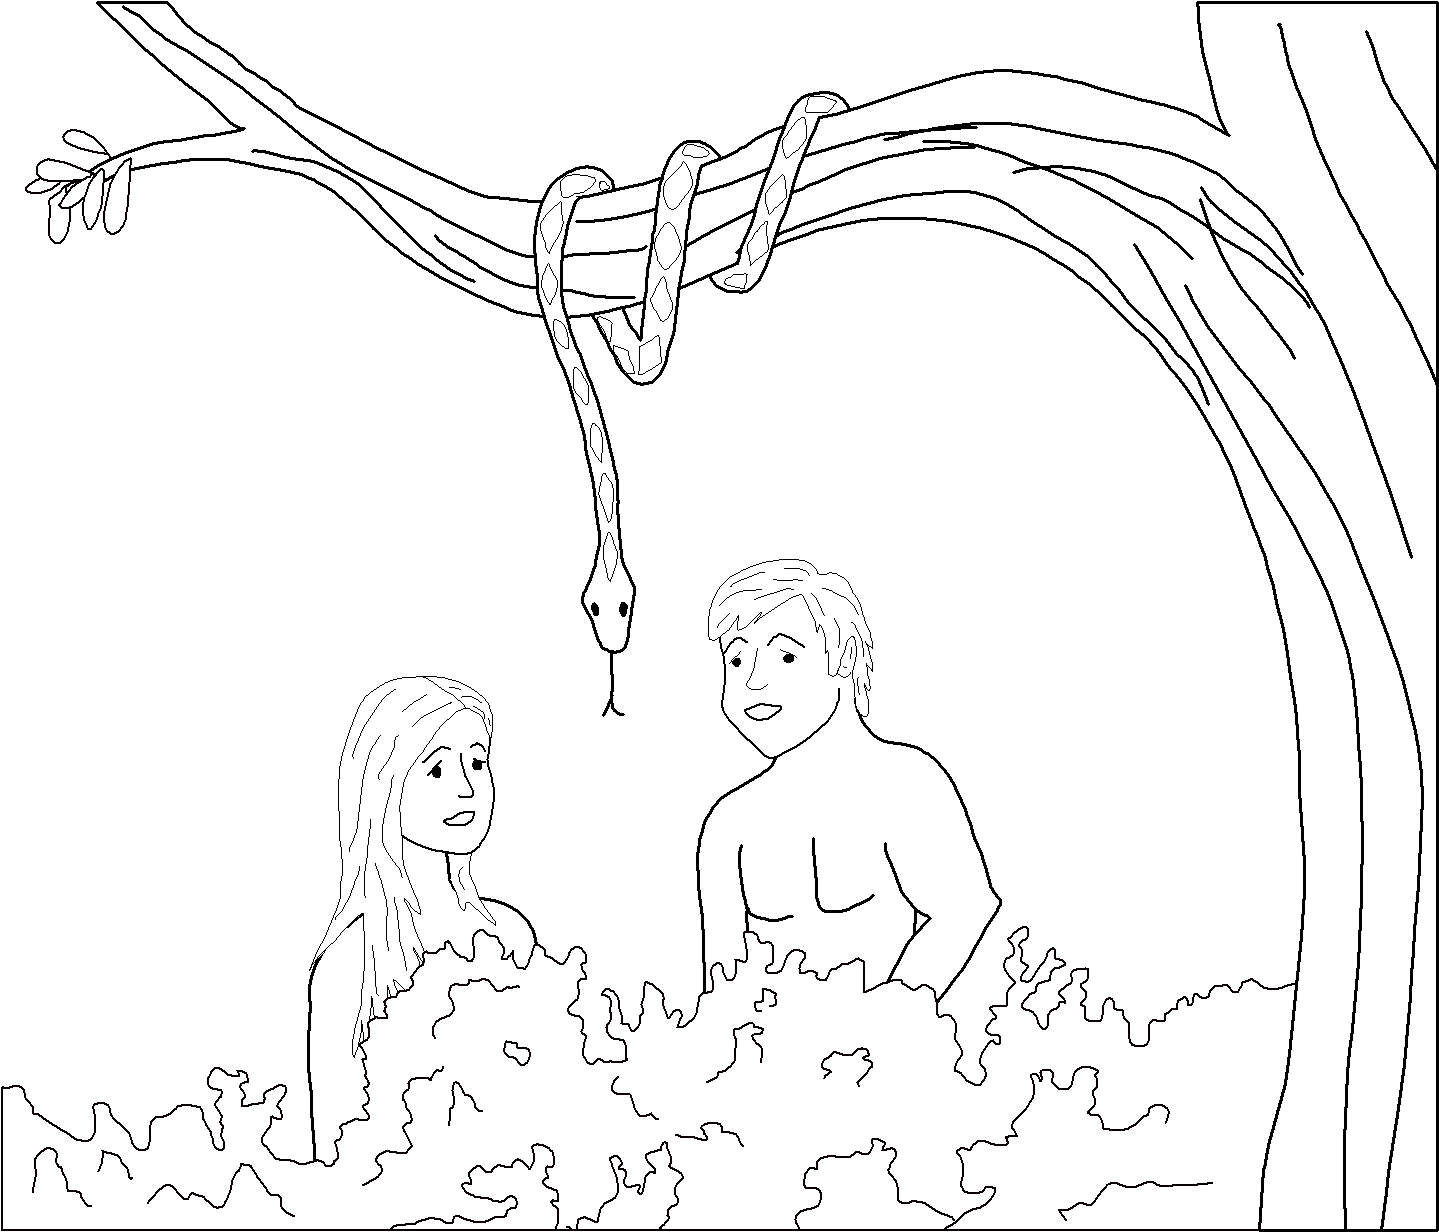 adam and eve drawing